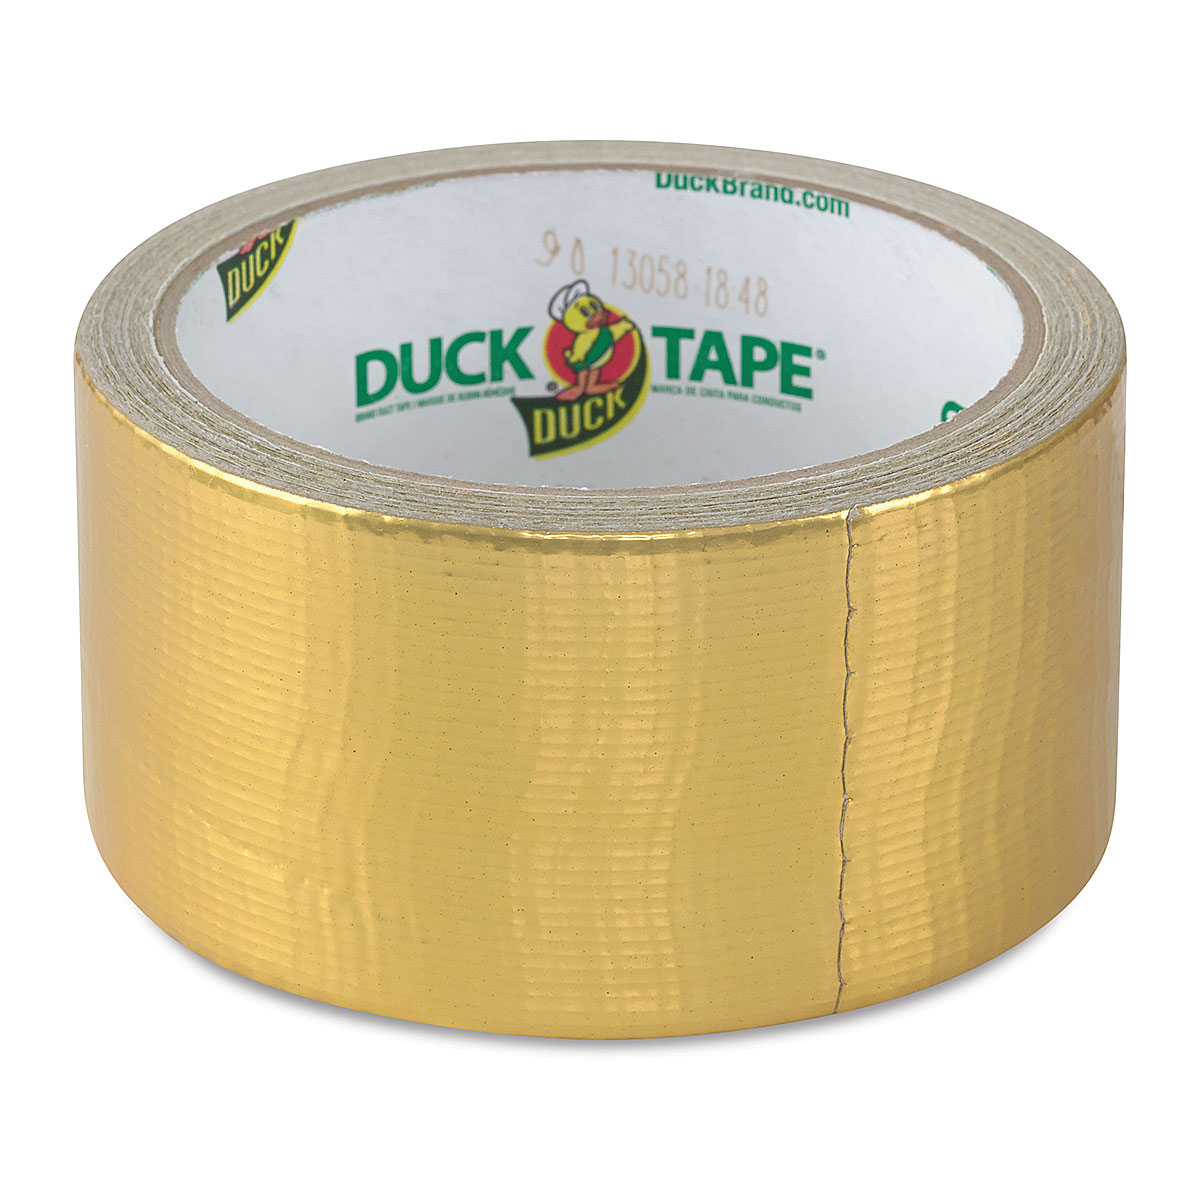 Duck Brand Metallic Duct Tape 1.88 in x 30 ft. Gold 